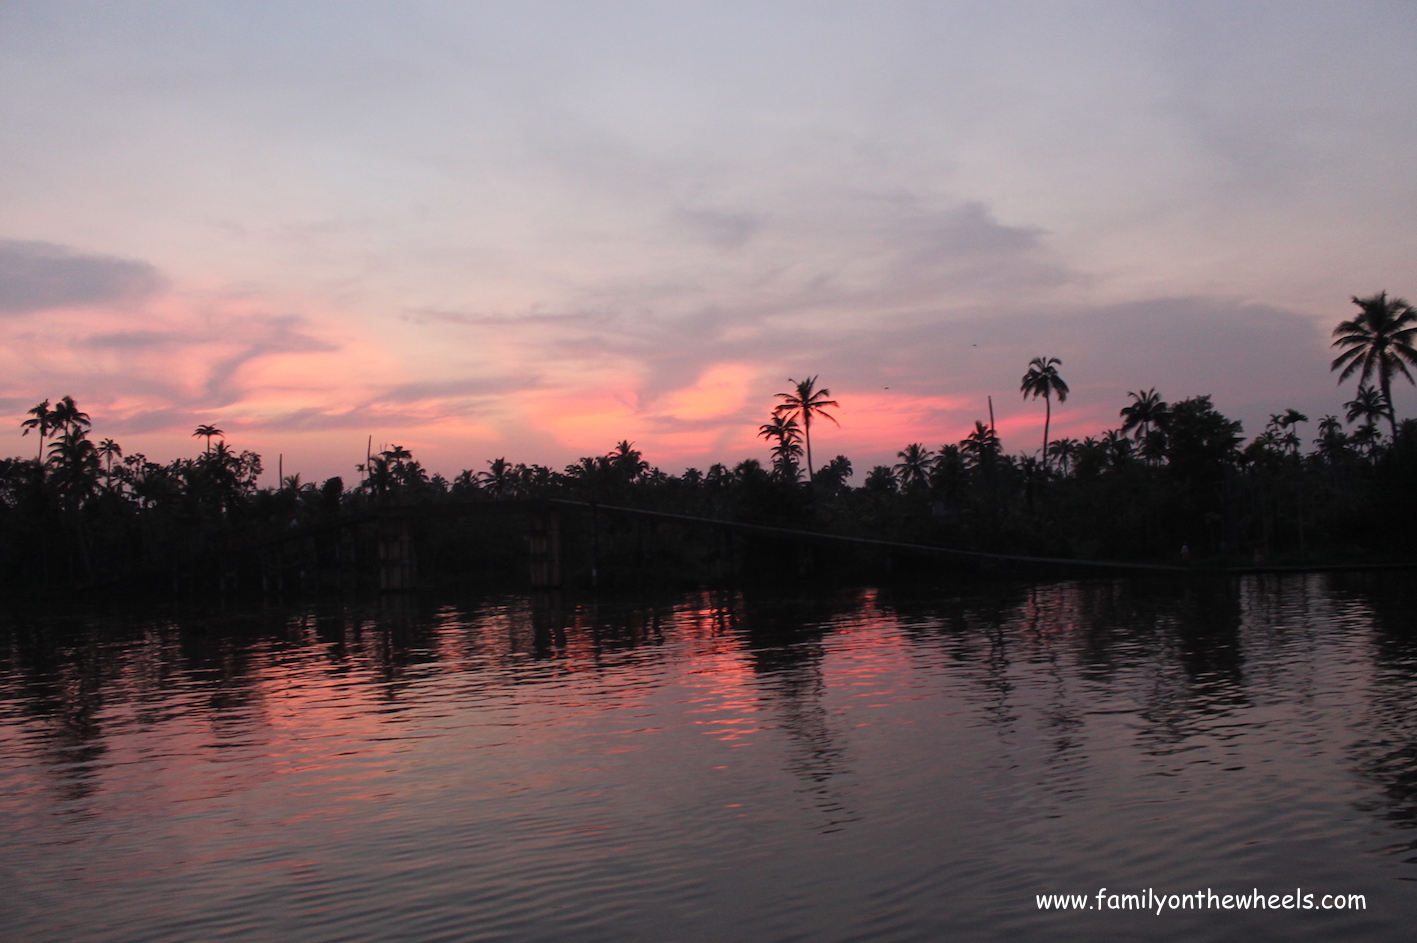 As the night falls while we were experiencing alleppey backwaters - #canals #Kerala #alleppey #backwaters #keralabackwaters #sunset #beaches #naturelover #sun